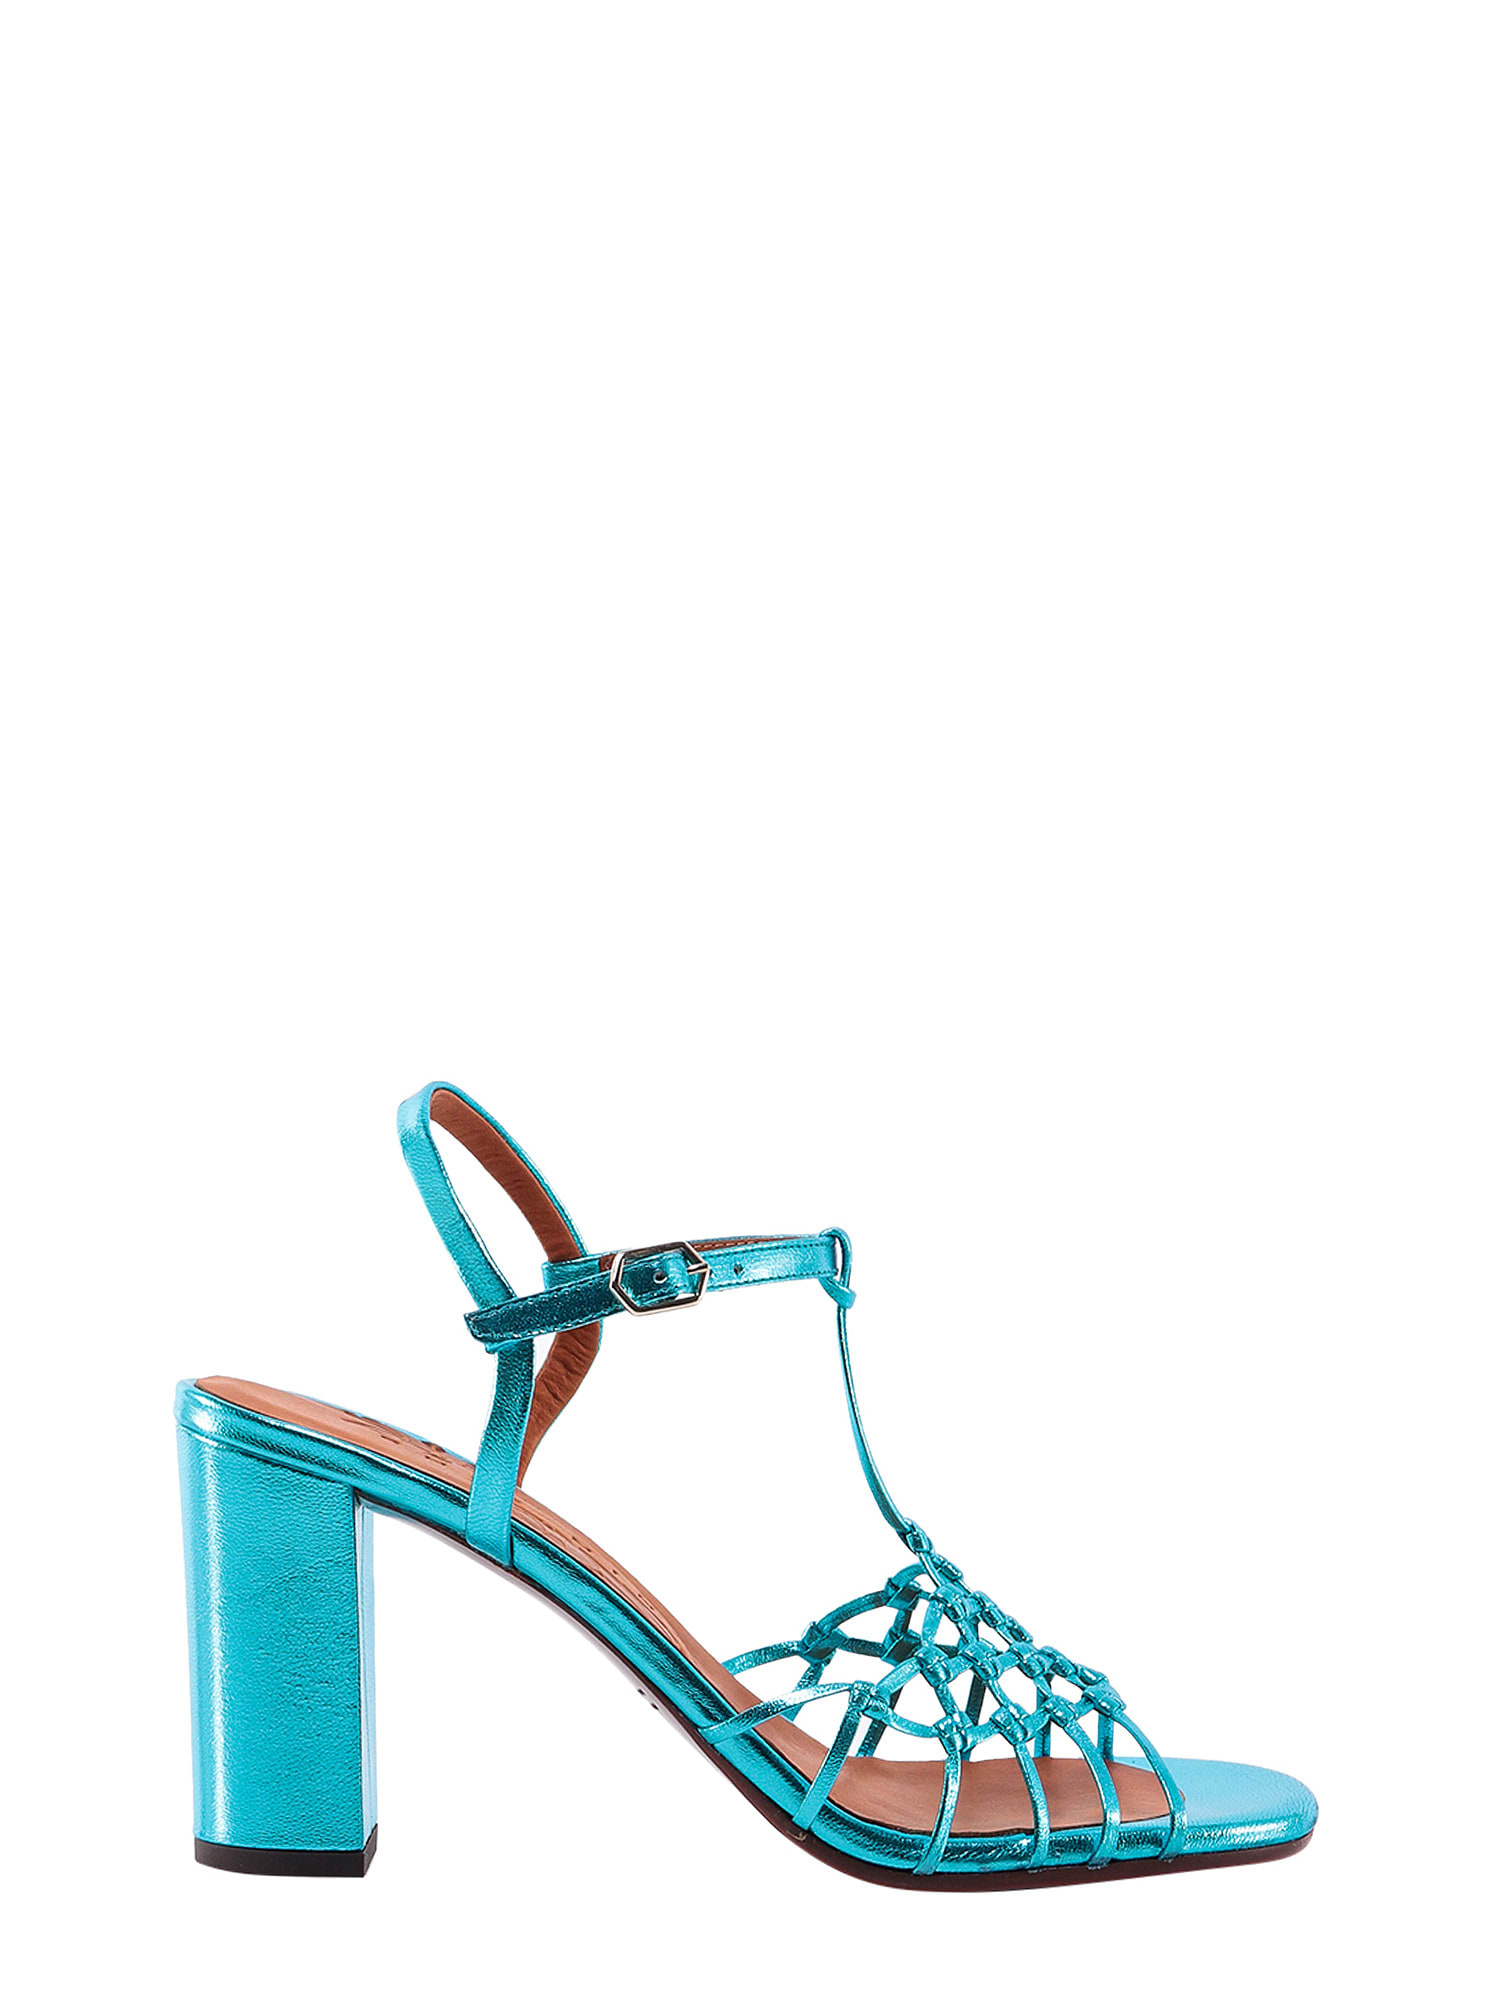 Chie Mihara Bassi Sandals In Blue